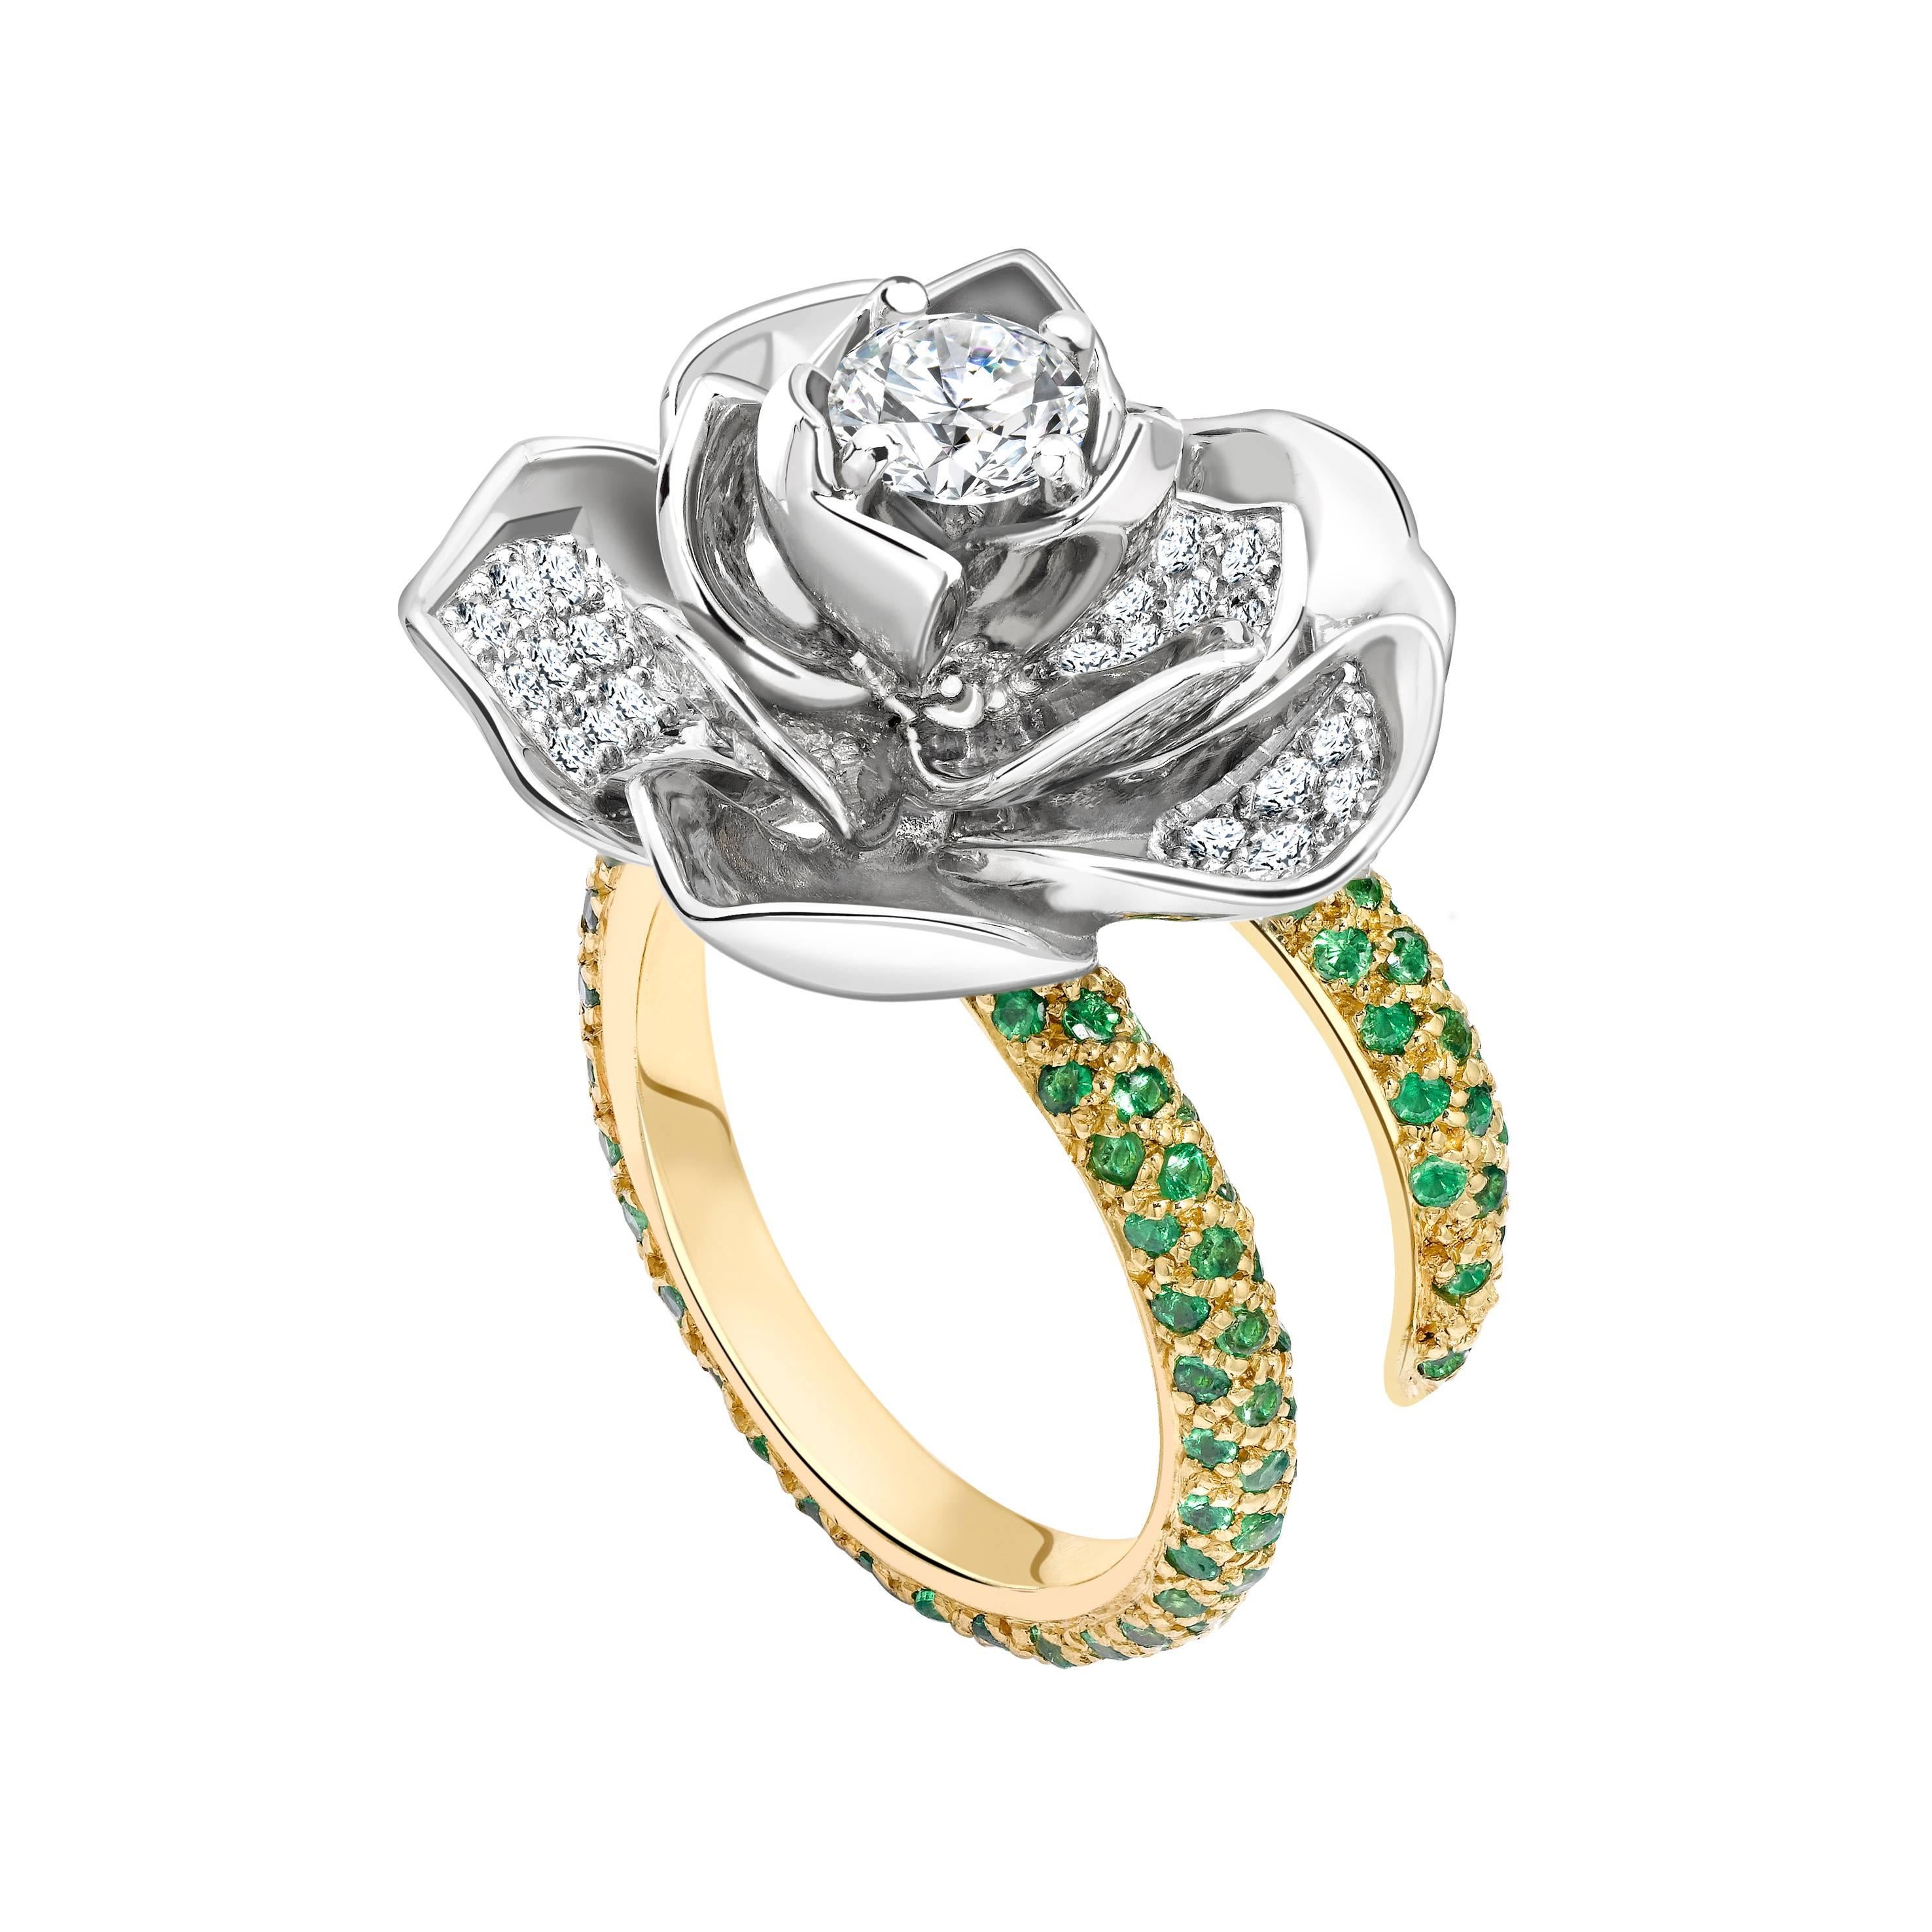 This ring is handcrafted in London from 18ct yellow gold and platinum. The band is pave set with vivid green tsavorites which total 1.30ct. The lotus bud is set with a central Gia certified white diamond which is 0.50ct and is Evs1 quality. The